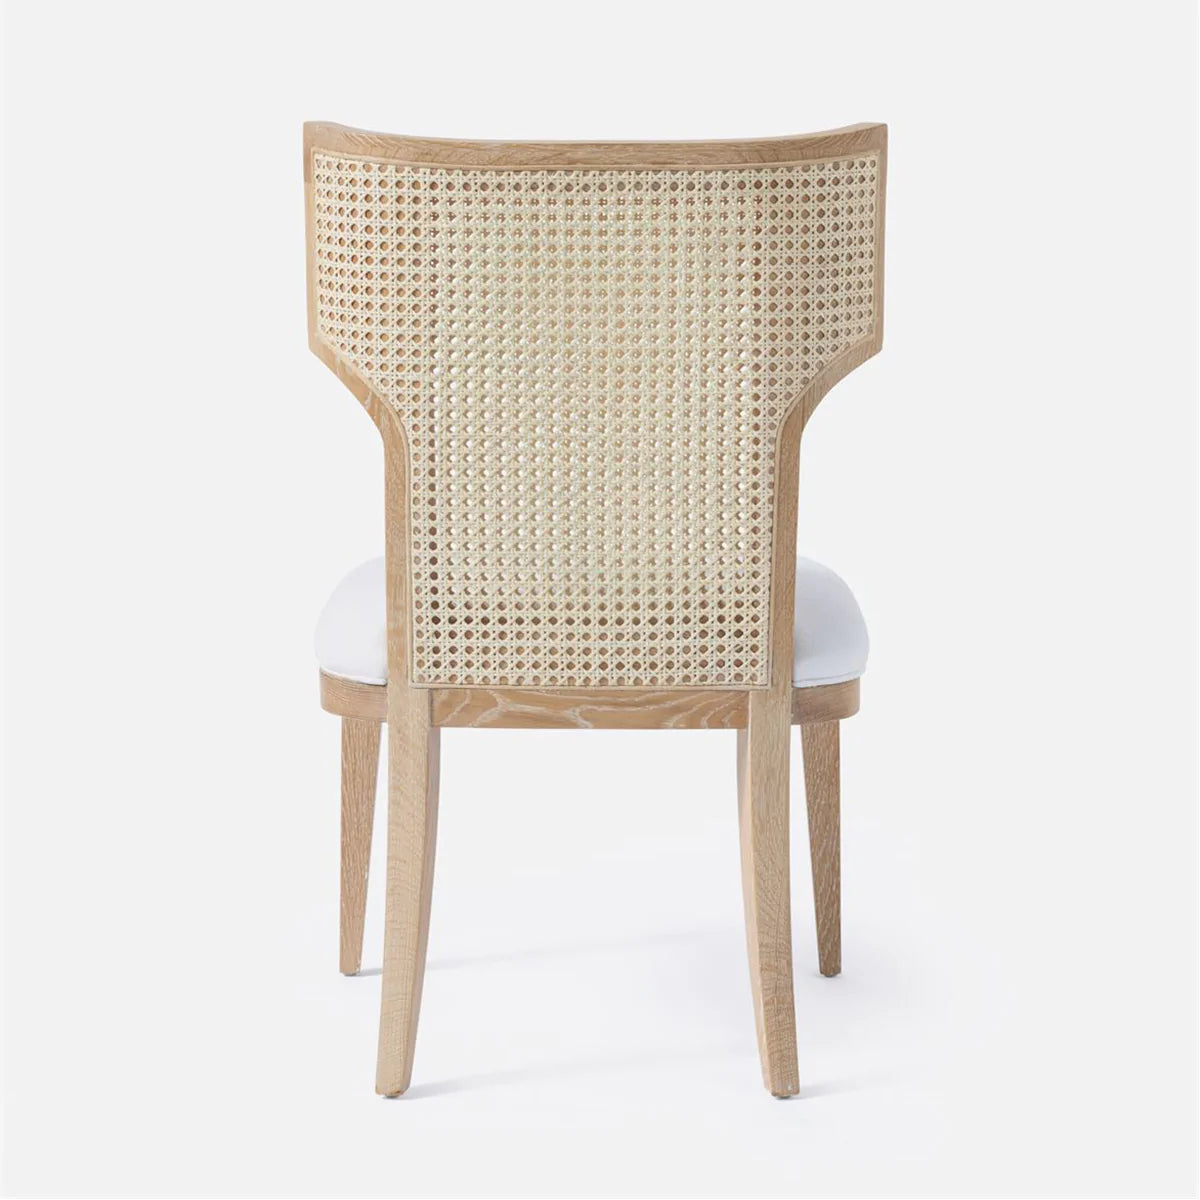 Made Goods Carleen Wingback Cane Dining Chair in Alsek Fabric